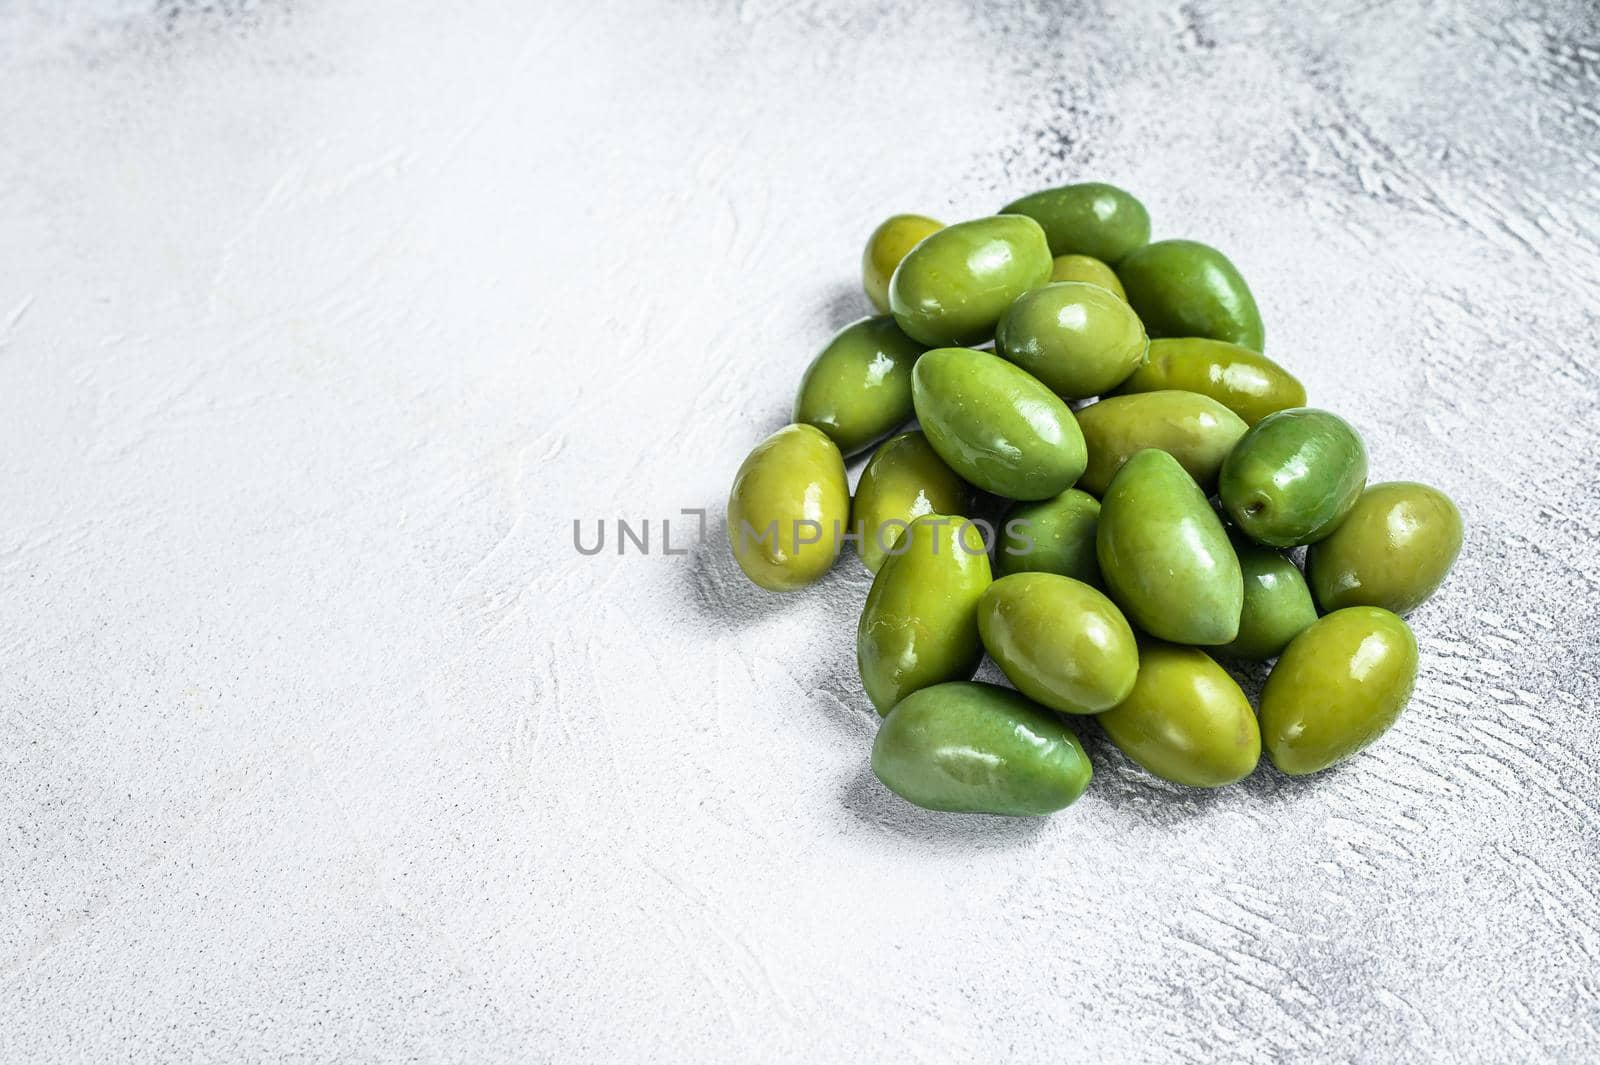 Fresh Green big olives on a table. White background. Top view. Copy space.